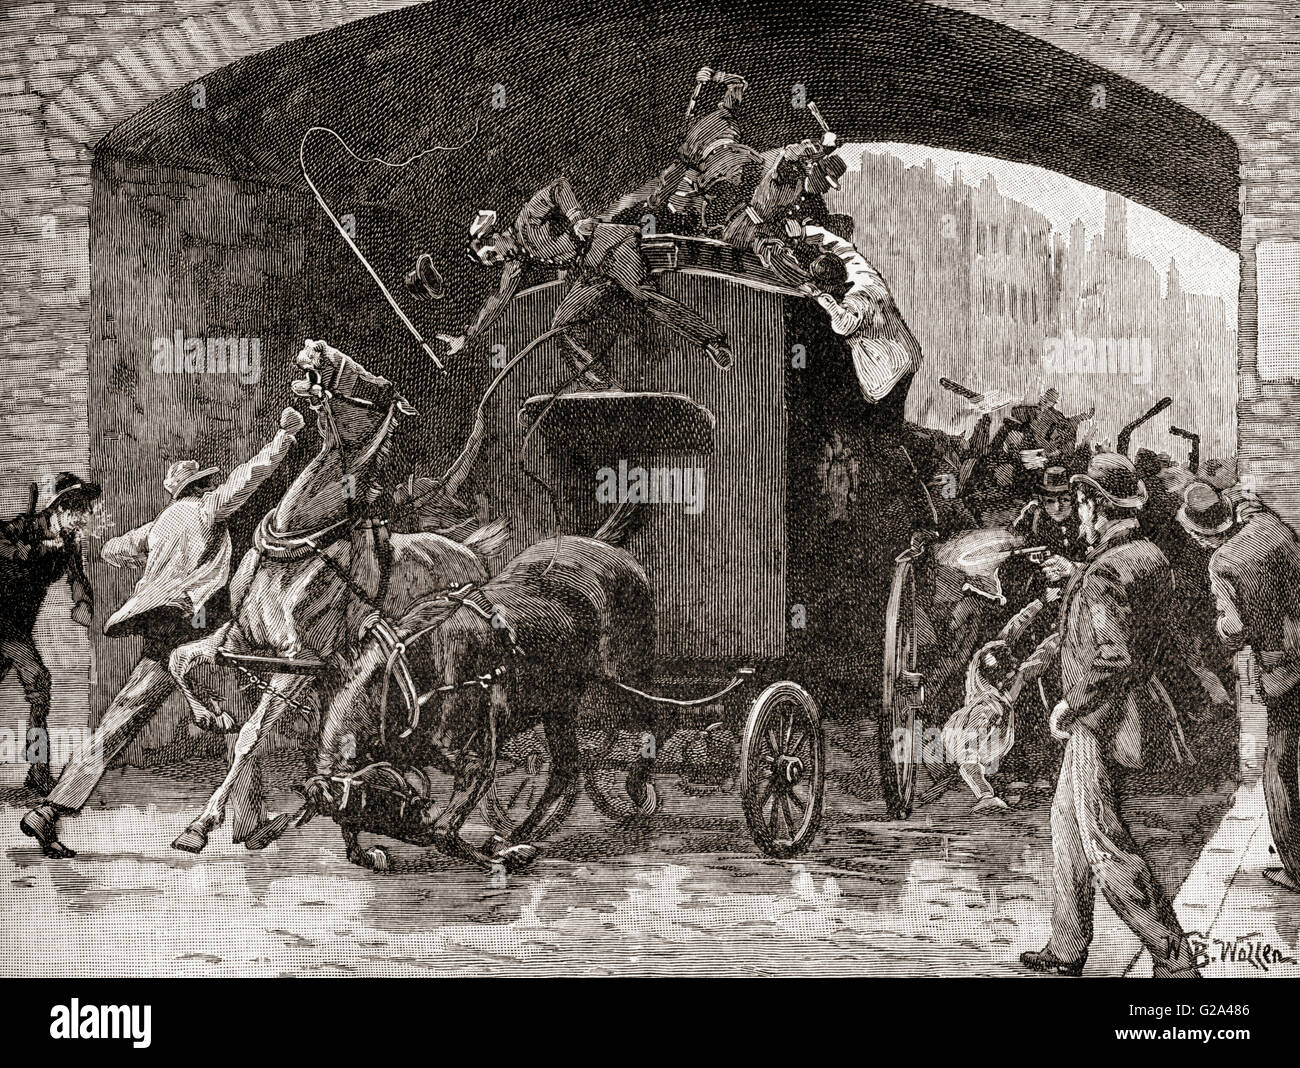 The Manchester Outrages, 1867.  Members of the Fenians, the Irish Republican Brotherhood, attacking a horse-drawn police van in Manchester, England transporting two arrested leaders of their Brotherhood.  This resulted in the arrest and subsequent execution of three of them for the murder of a police officer travelling inside the van. Stock Photo